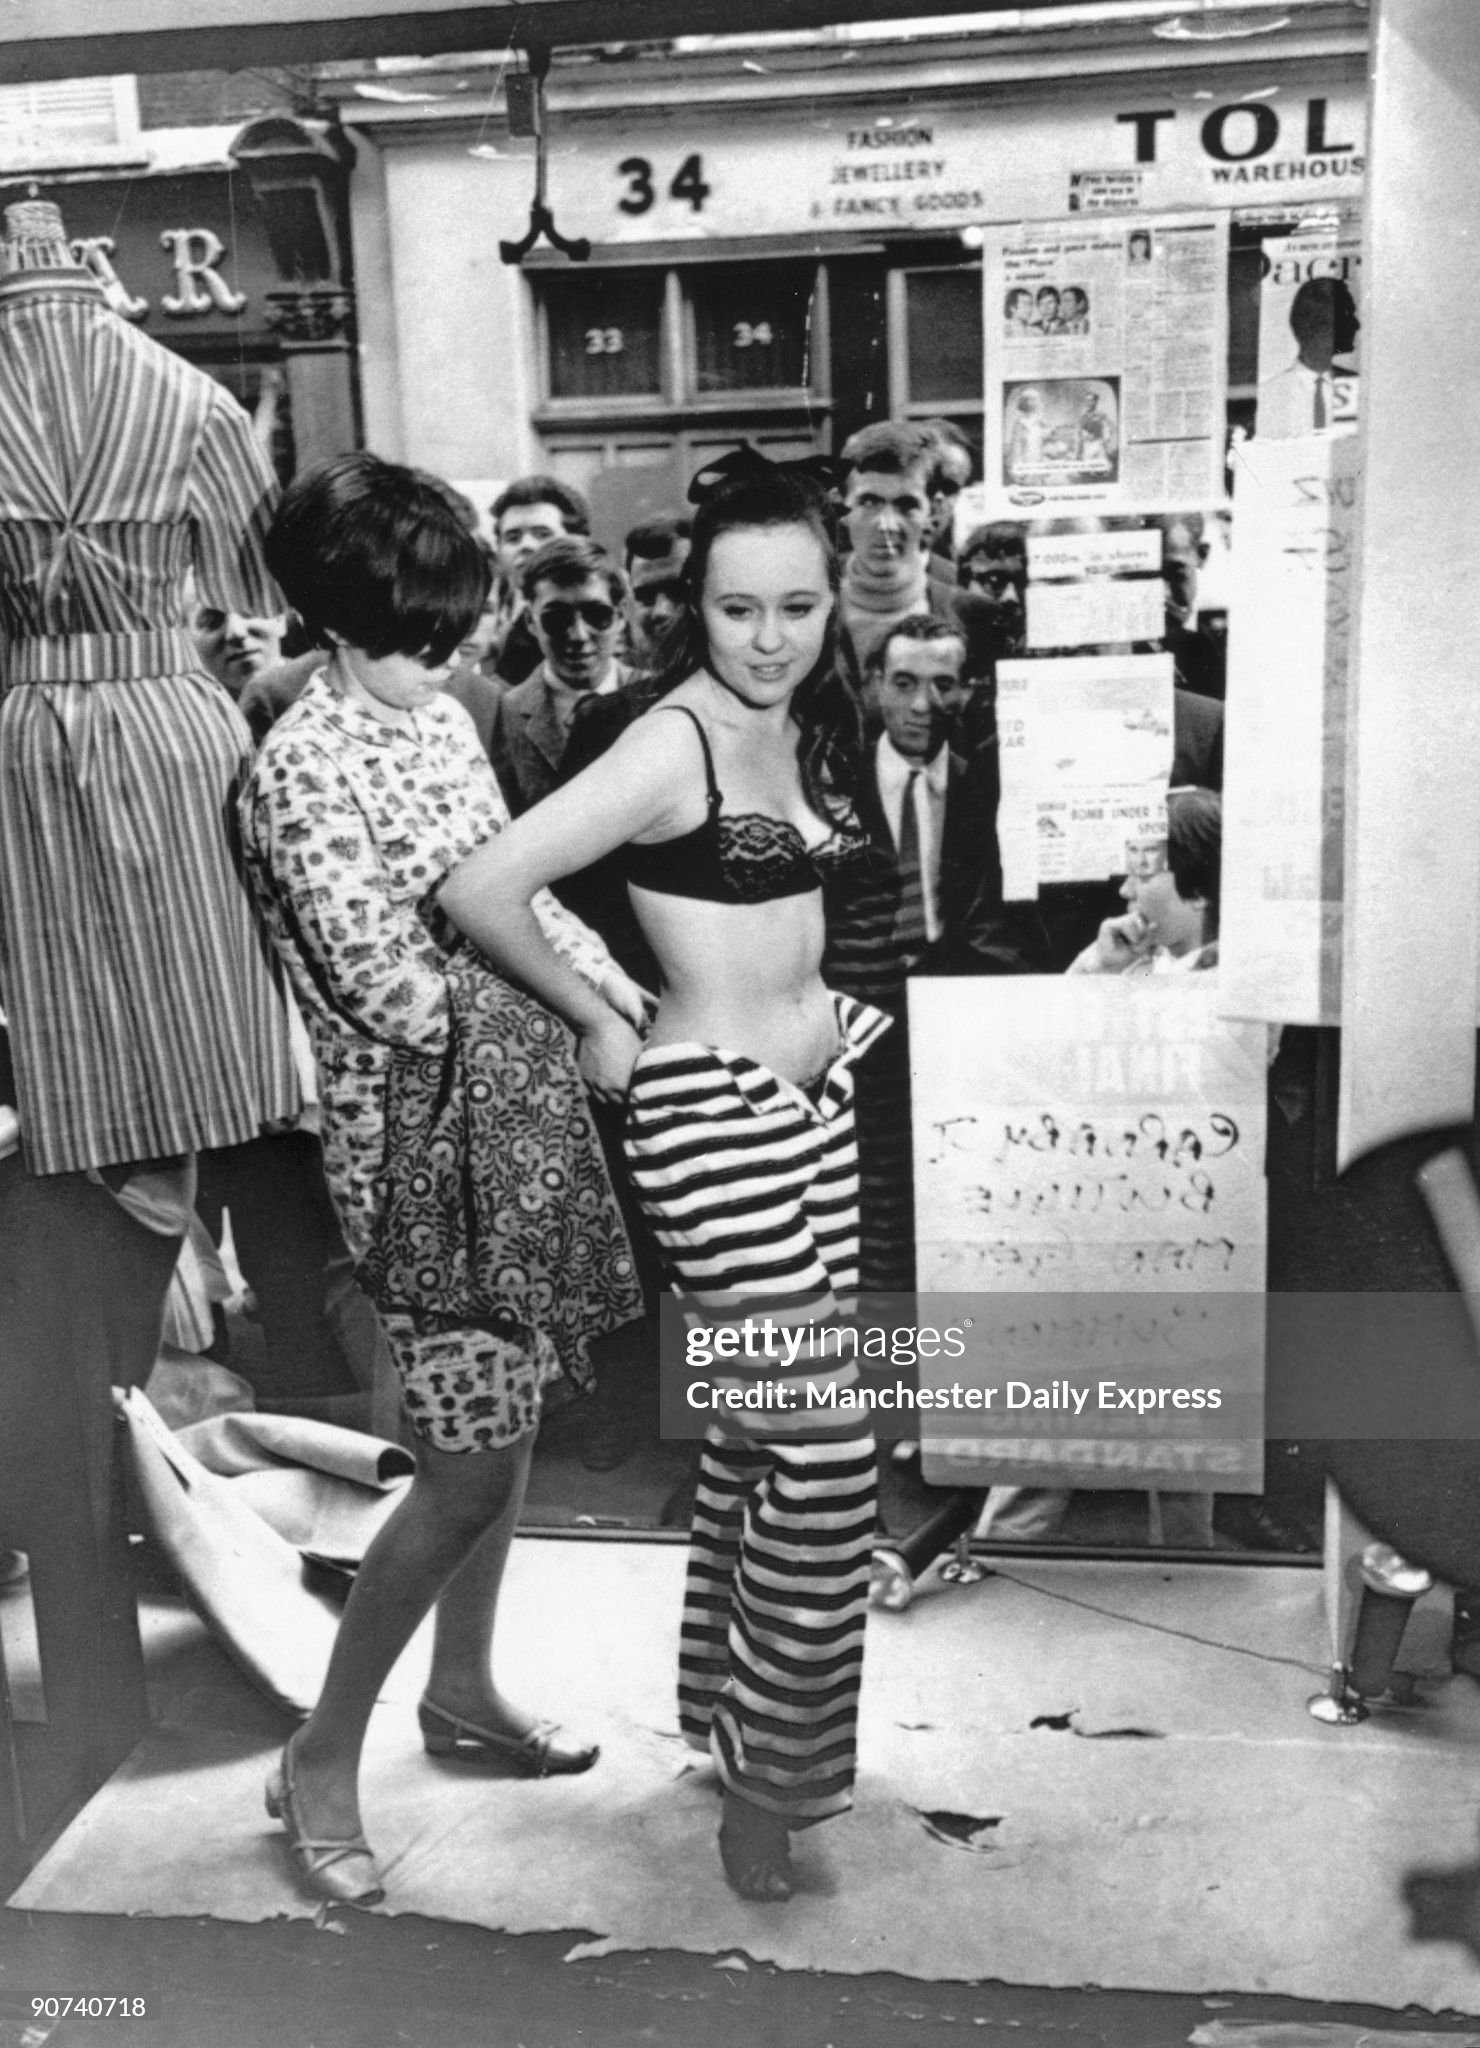 13 May 1966. Crowds of men look through the window of the ‘Lady Jane’ clothes boutique on Carnaby Street, London, whilst a model is dressed in the latest fashions. 